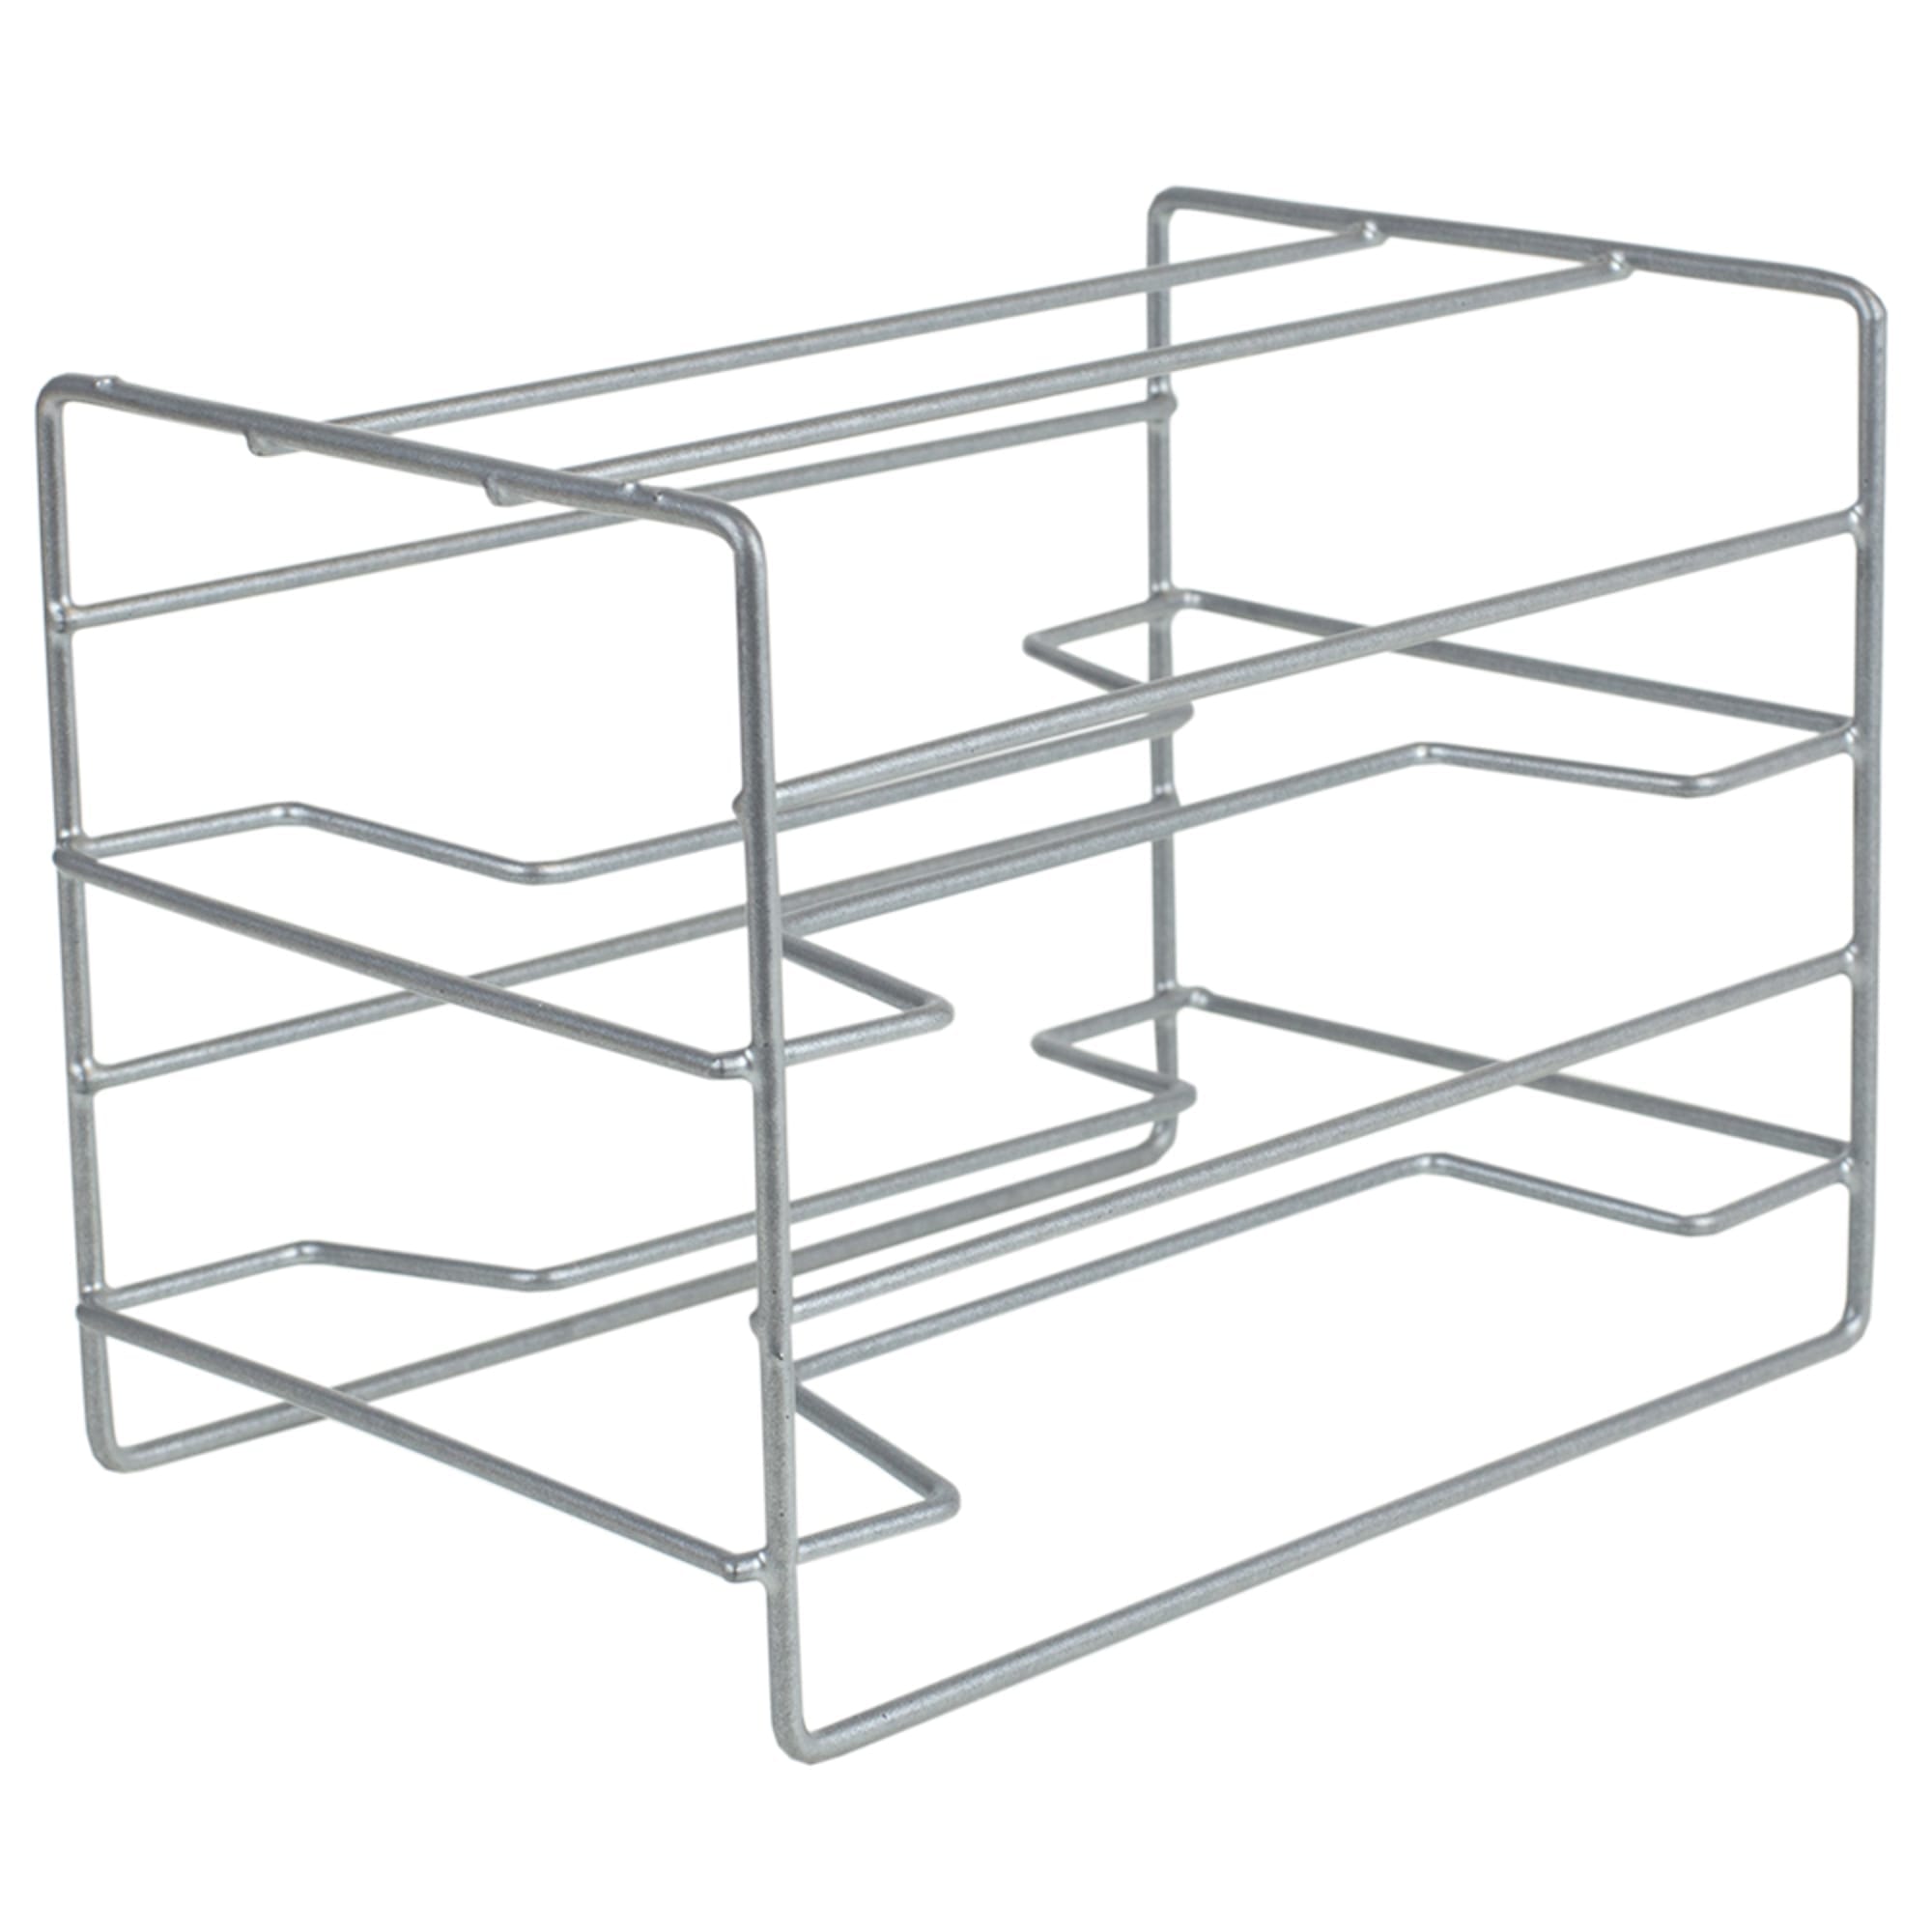 Home Basics Vinyl Coated Steel Standing Wrap Organizer, Silver $5.00 EACH, CASE PACK OF 12